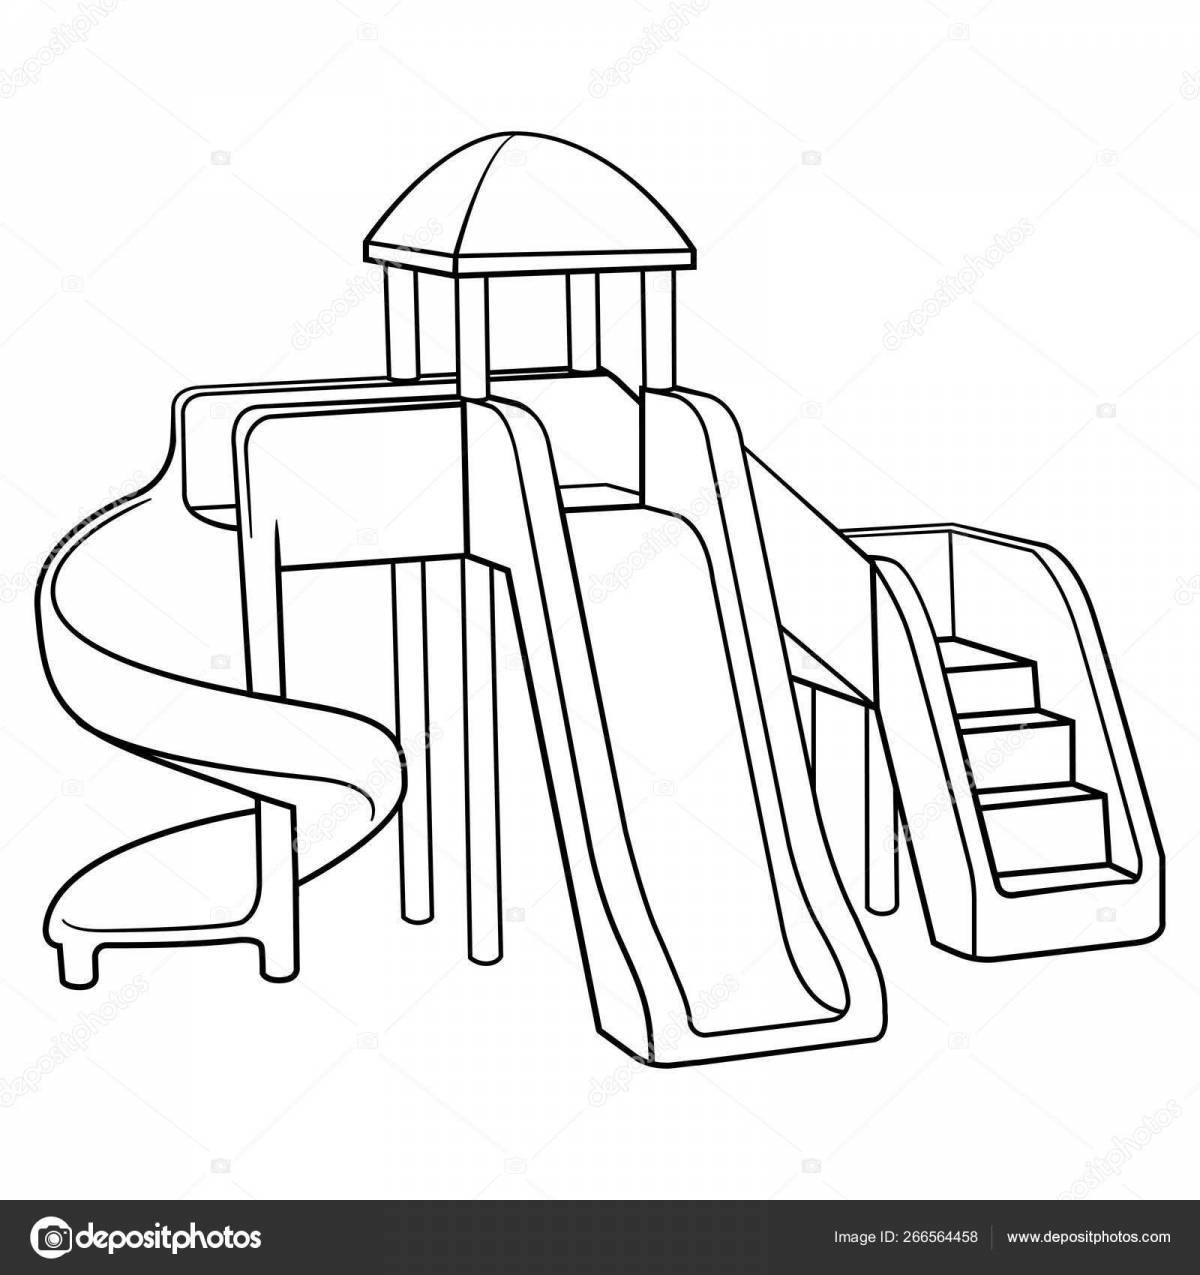 Adorable slide eater coloring book